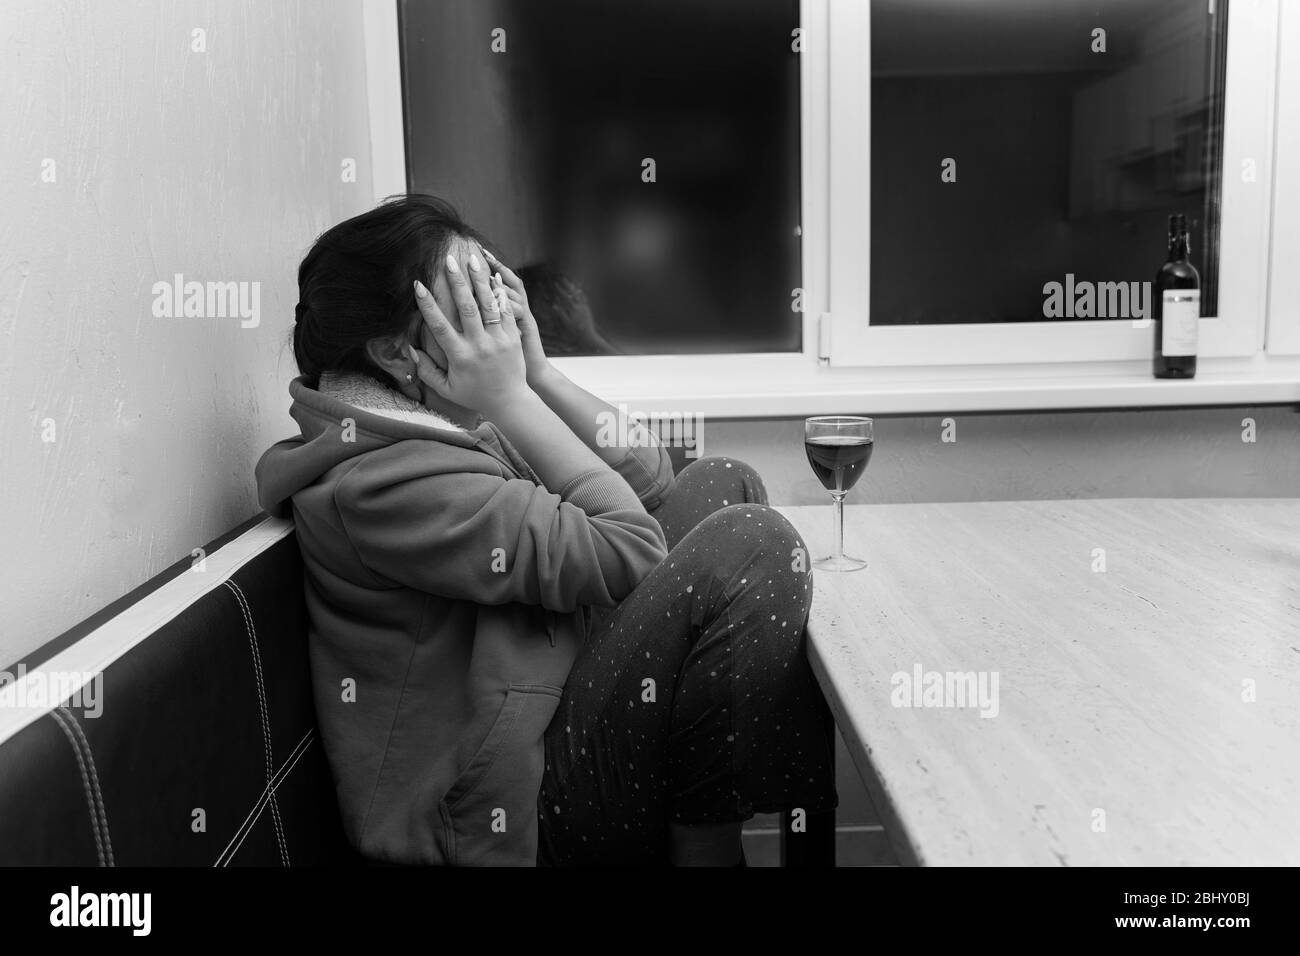 the girl is sitting at the table with her face in her hands. in front of her is a glass of wine. state of sadness and depression Stock Photo